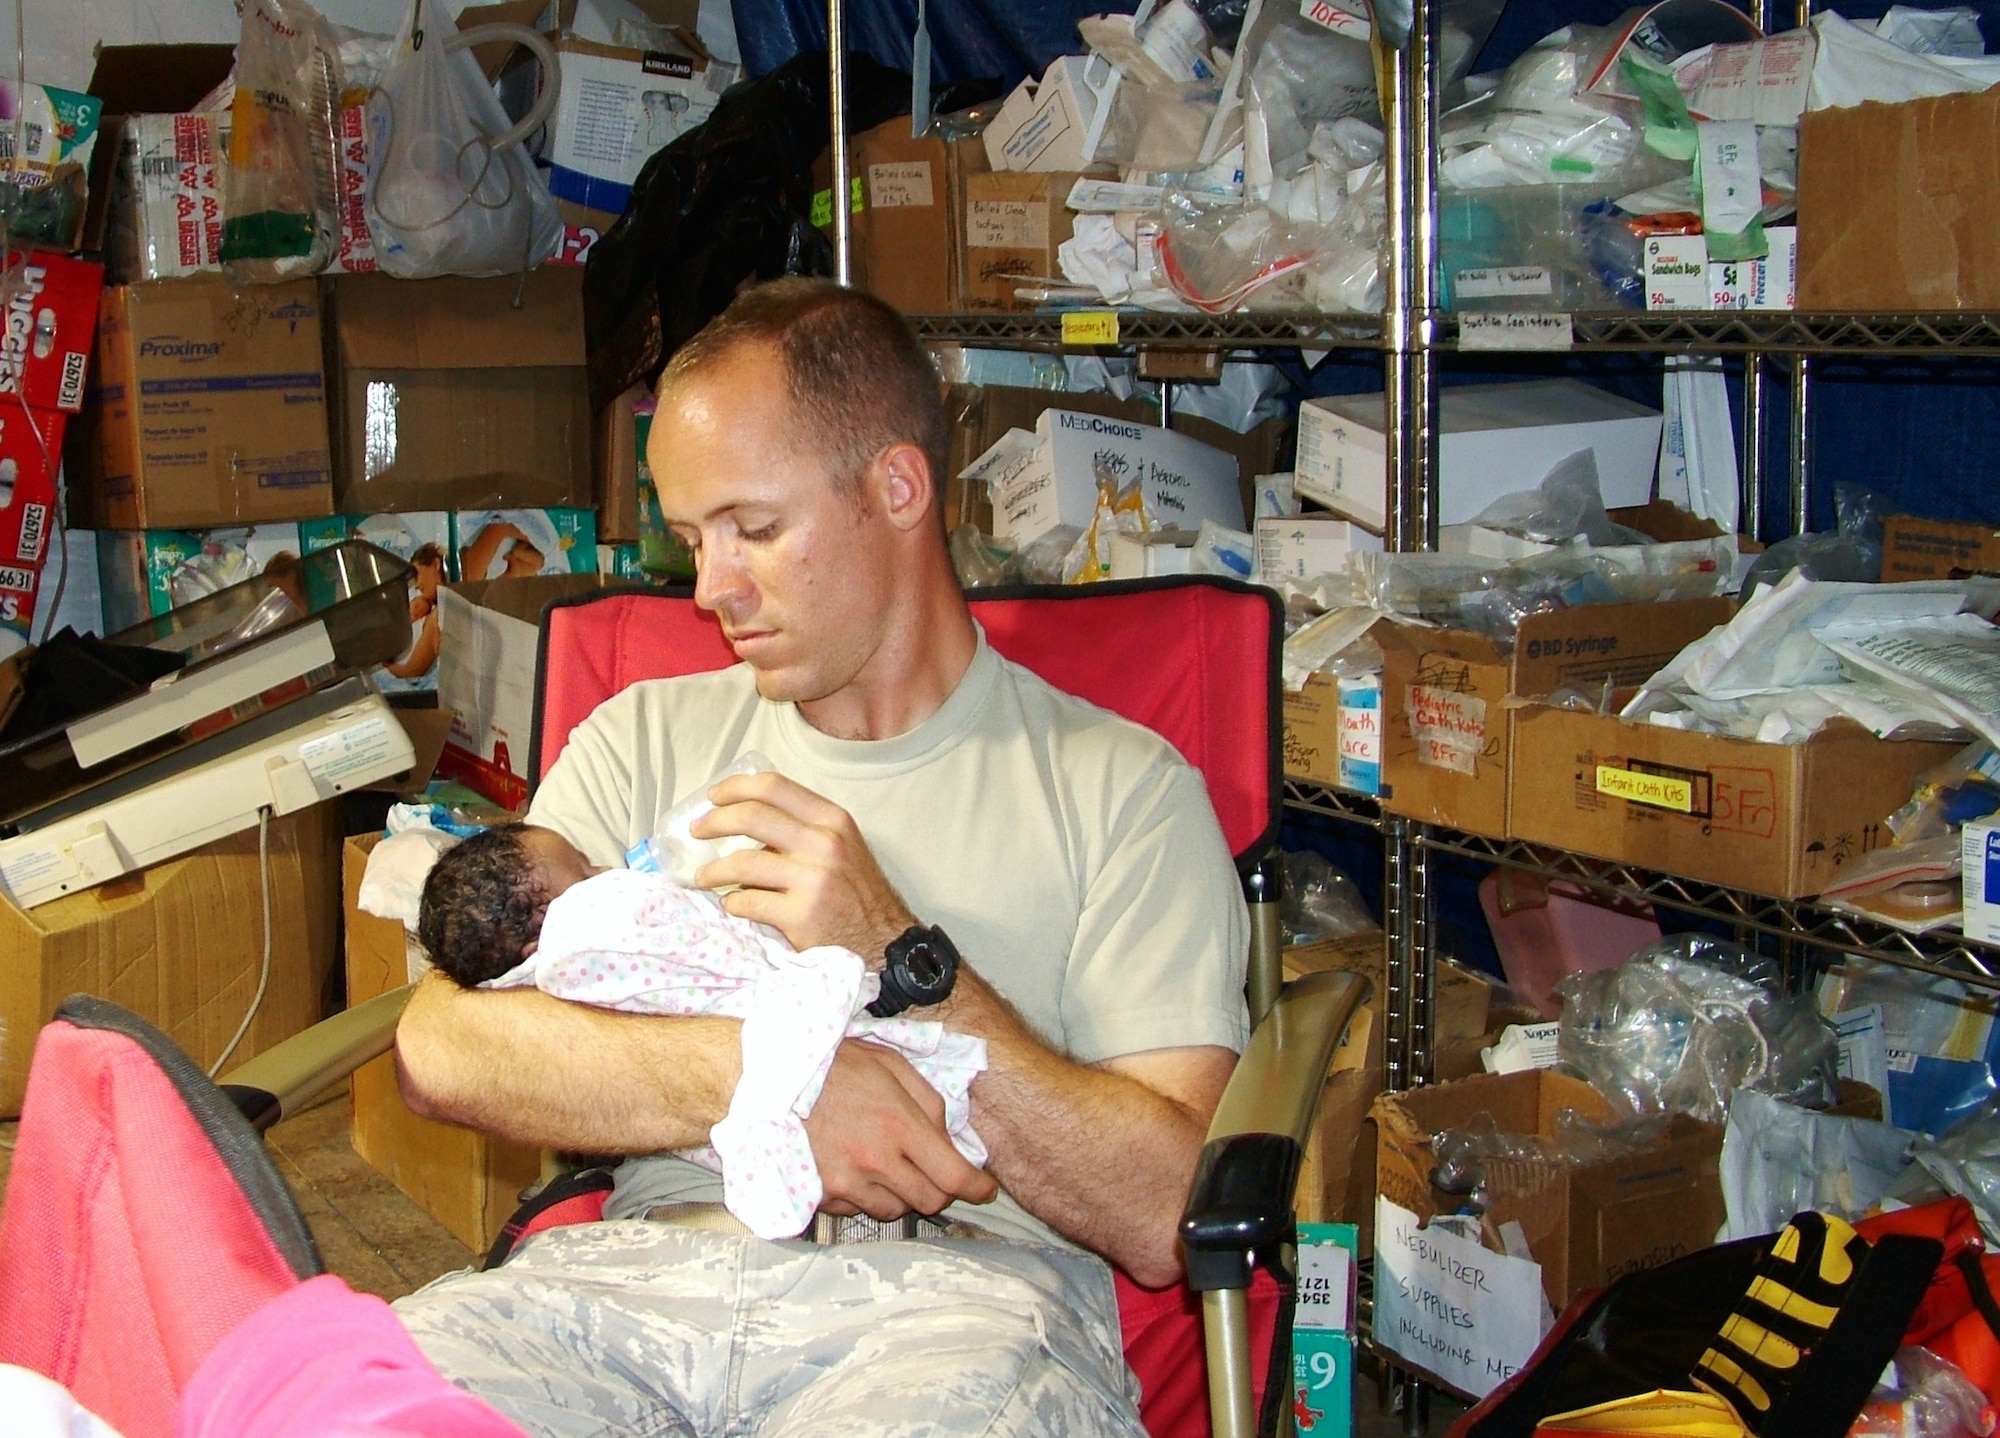 First Lt. Michael Capra, 3rd Combat Communications Support Squadron, Tinker Air Force Base, Okla., cares for a baby at the University of Miami Hospital, Port-Au-Prince airport location. Members of the 3rd Combat Communications Group were supporting relief efforts in Haiti since February and the last remaining members returned home in June. (US Air Force photo)